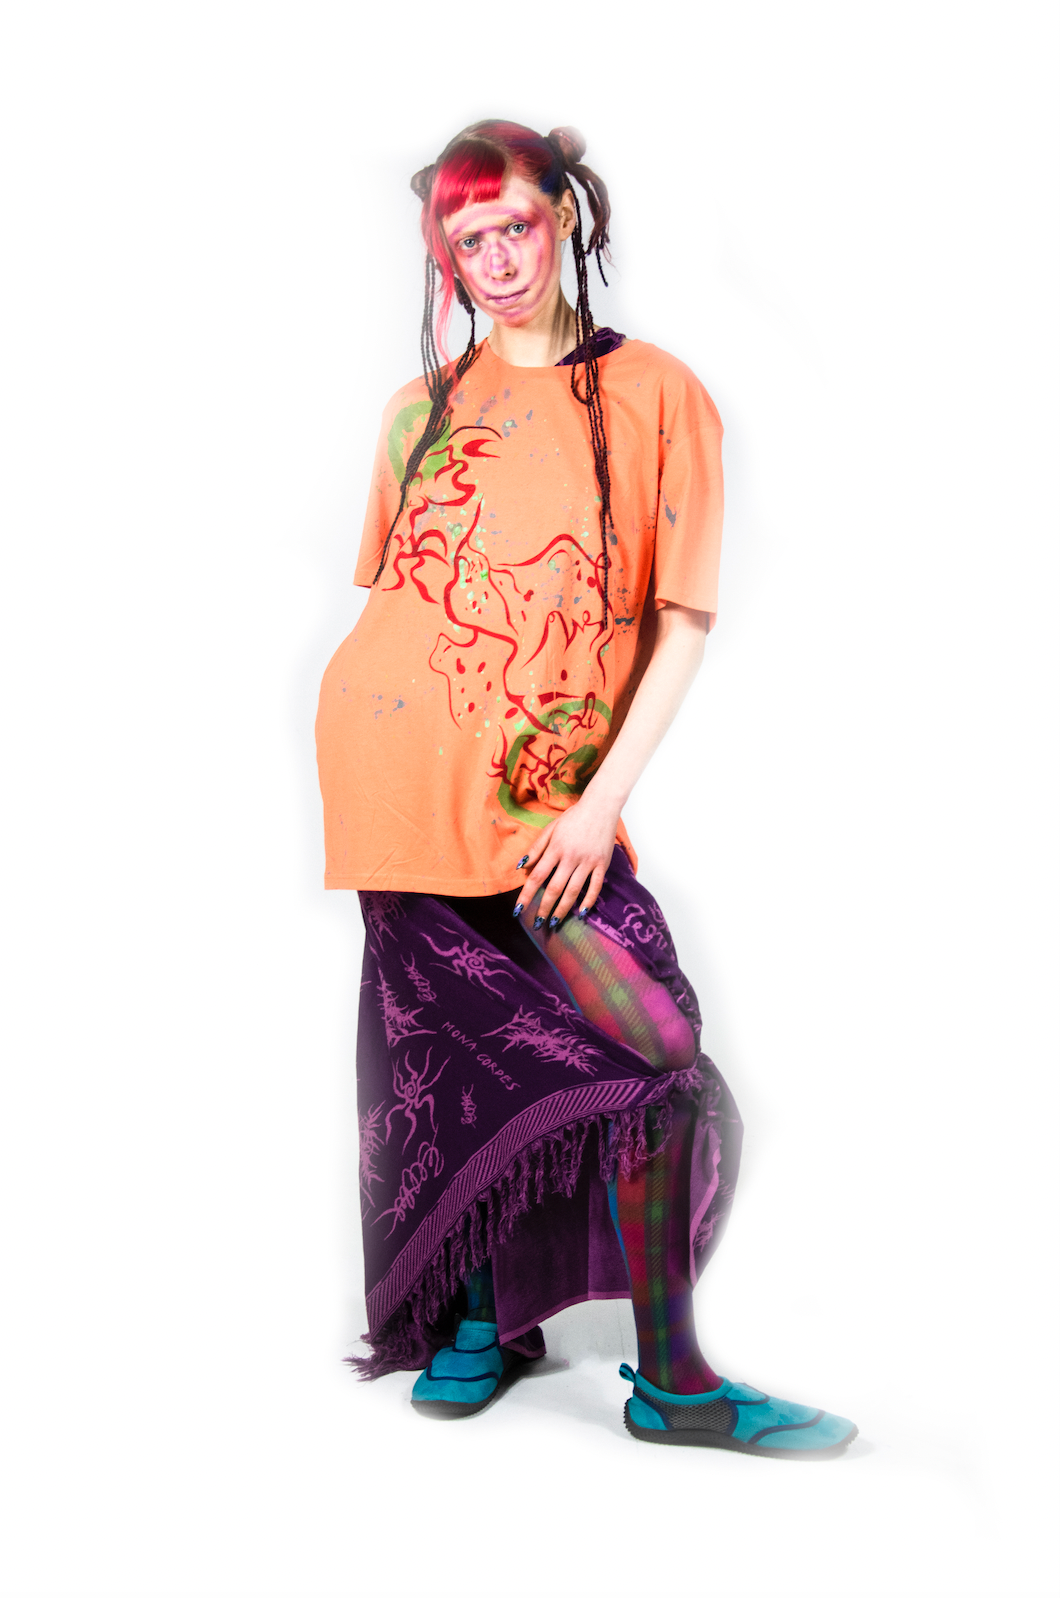 Model is standing with one leg bent while wearing an orange t-shirt and a long purple printed skirt. The orange shirt has abstract red lines on it and the bottom is a long skirt that has a slit near the knee. The model has colorful orange, pink and purple hair pulled back into a sleek bun with strands flowing out. The print of the dark purple outfit contains light, vibrant purplish pink squiggles and drawings that resemble bugs with long legs and leafy plants. 